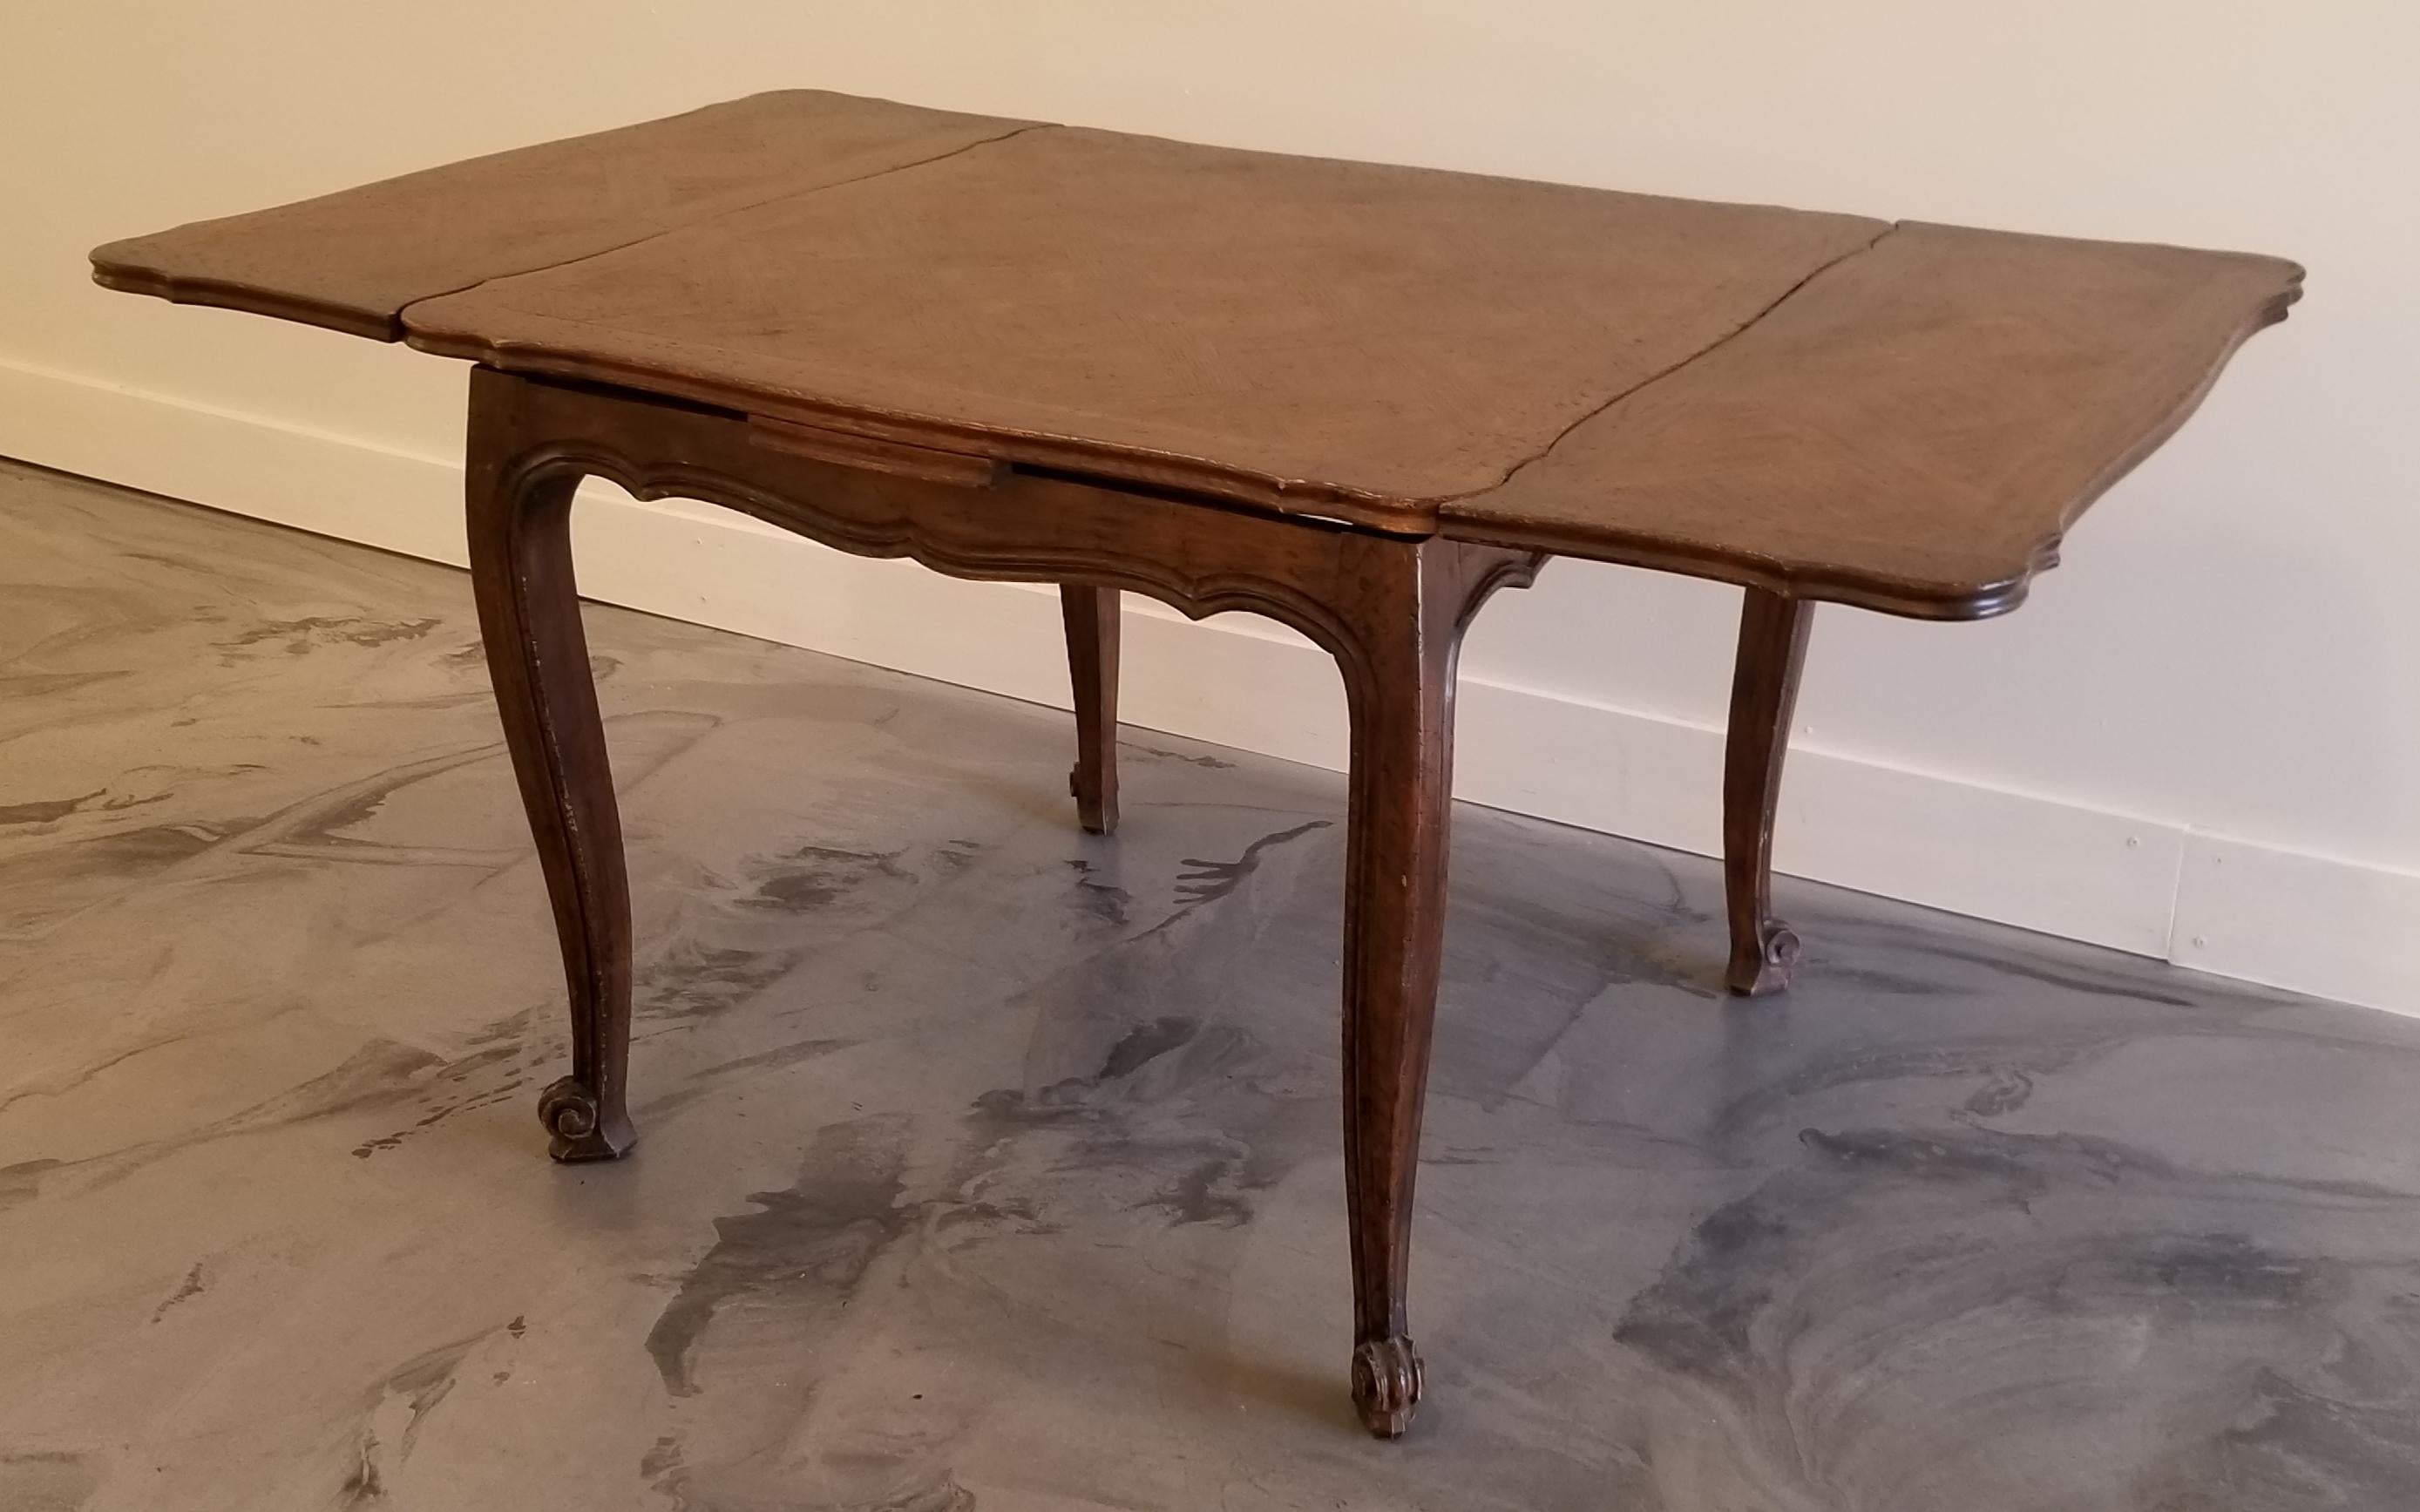 An early 20th century French provincial draw leaf dining table with oak parquet top, matching parquet leaves and hand carved scroll legs. Uncommon diminutive size that would work well as a dinette table, breakfast room or small dining area. Fully